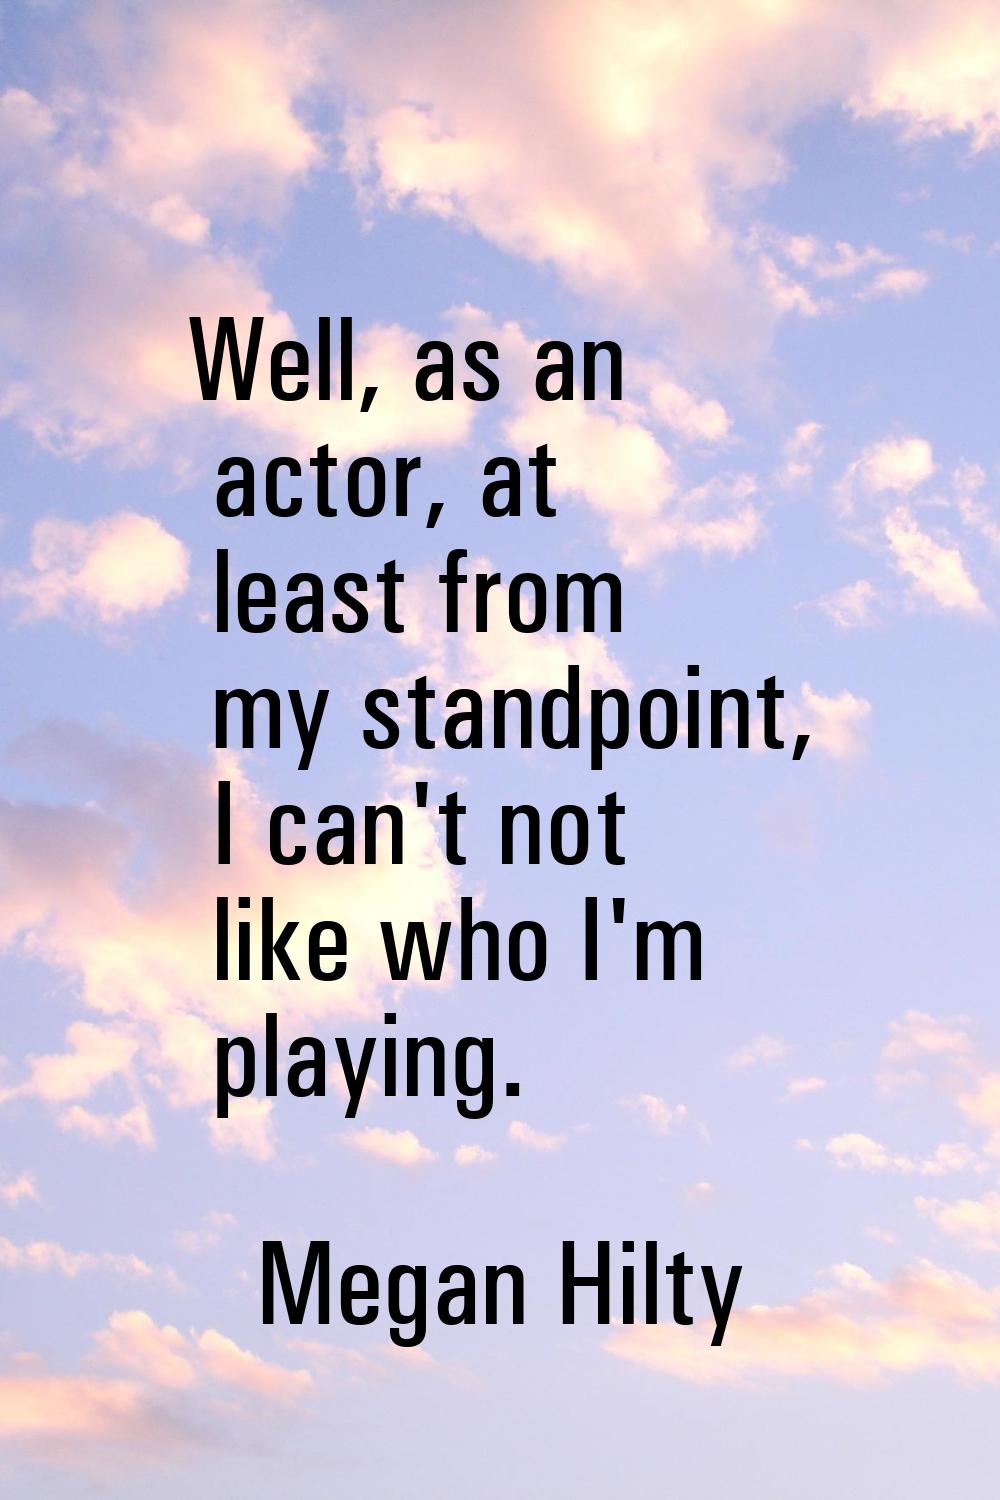 Well, as an actor, at least from my standpoint, I can't not like who I'm playing.